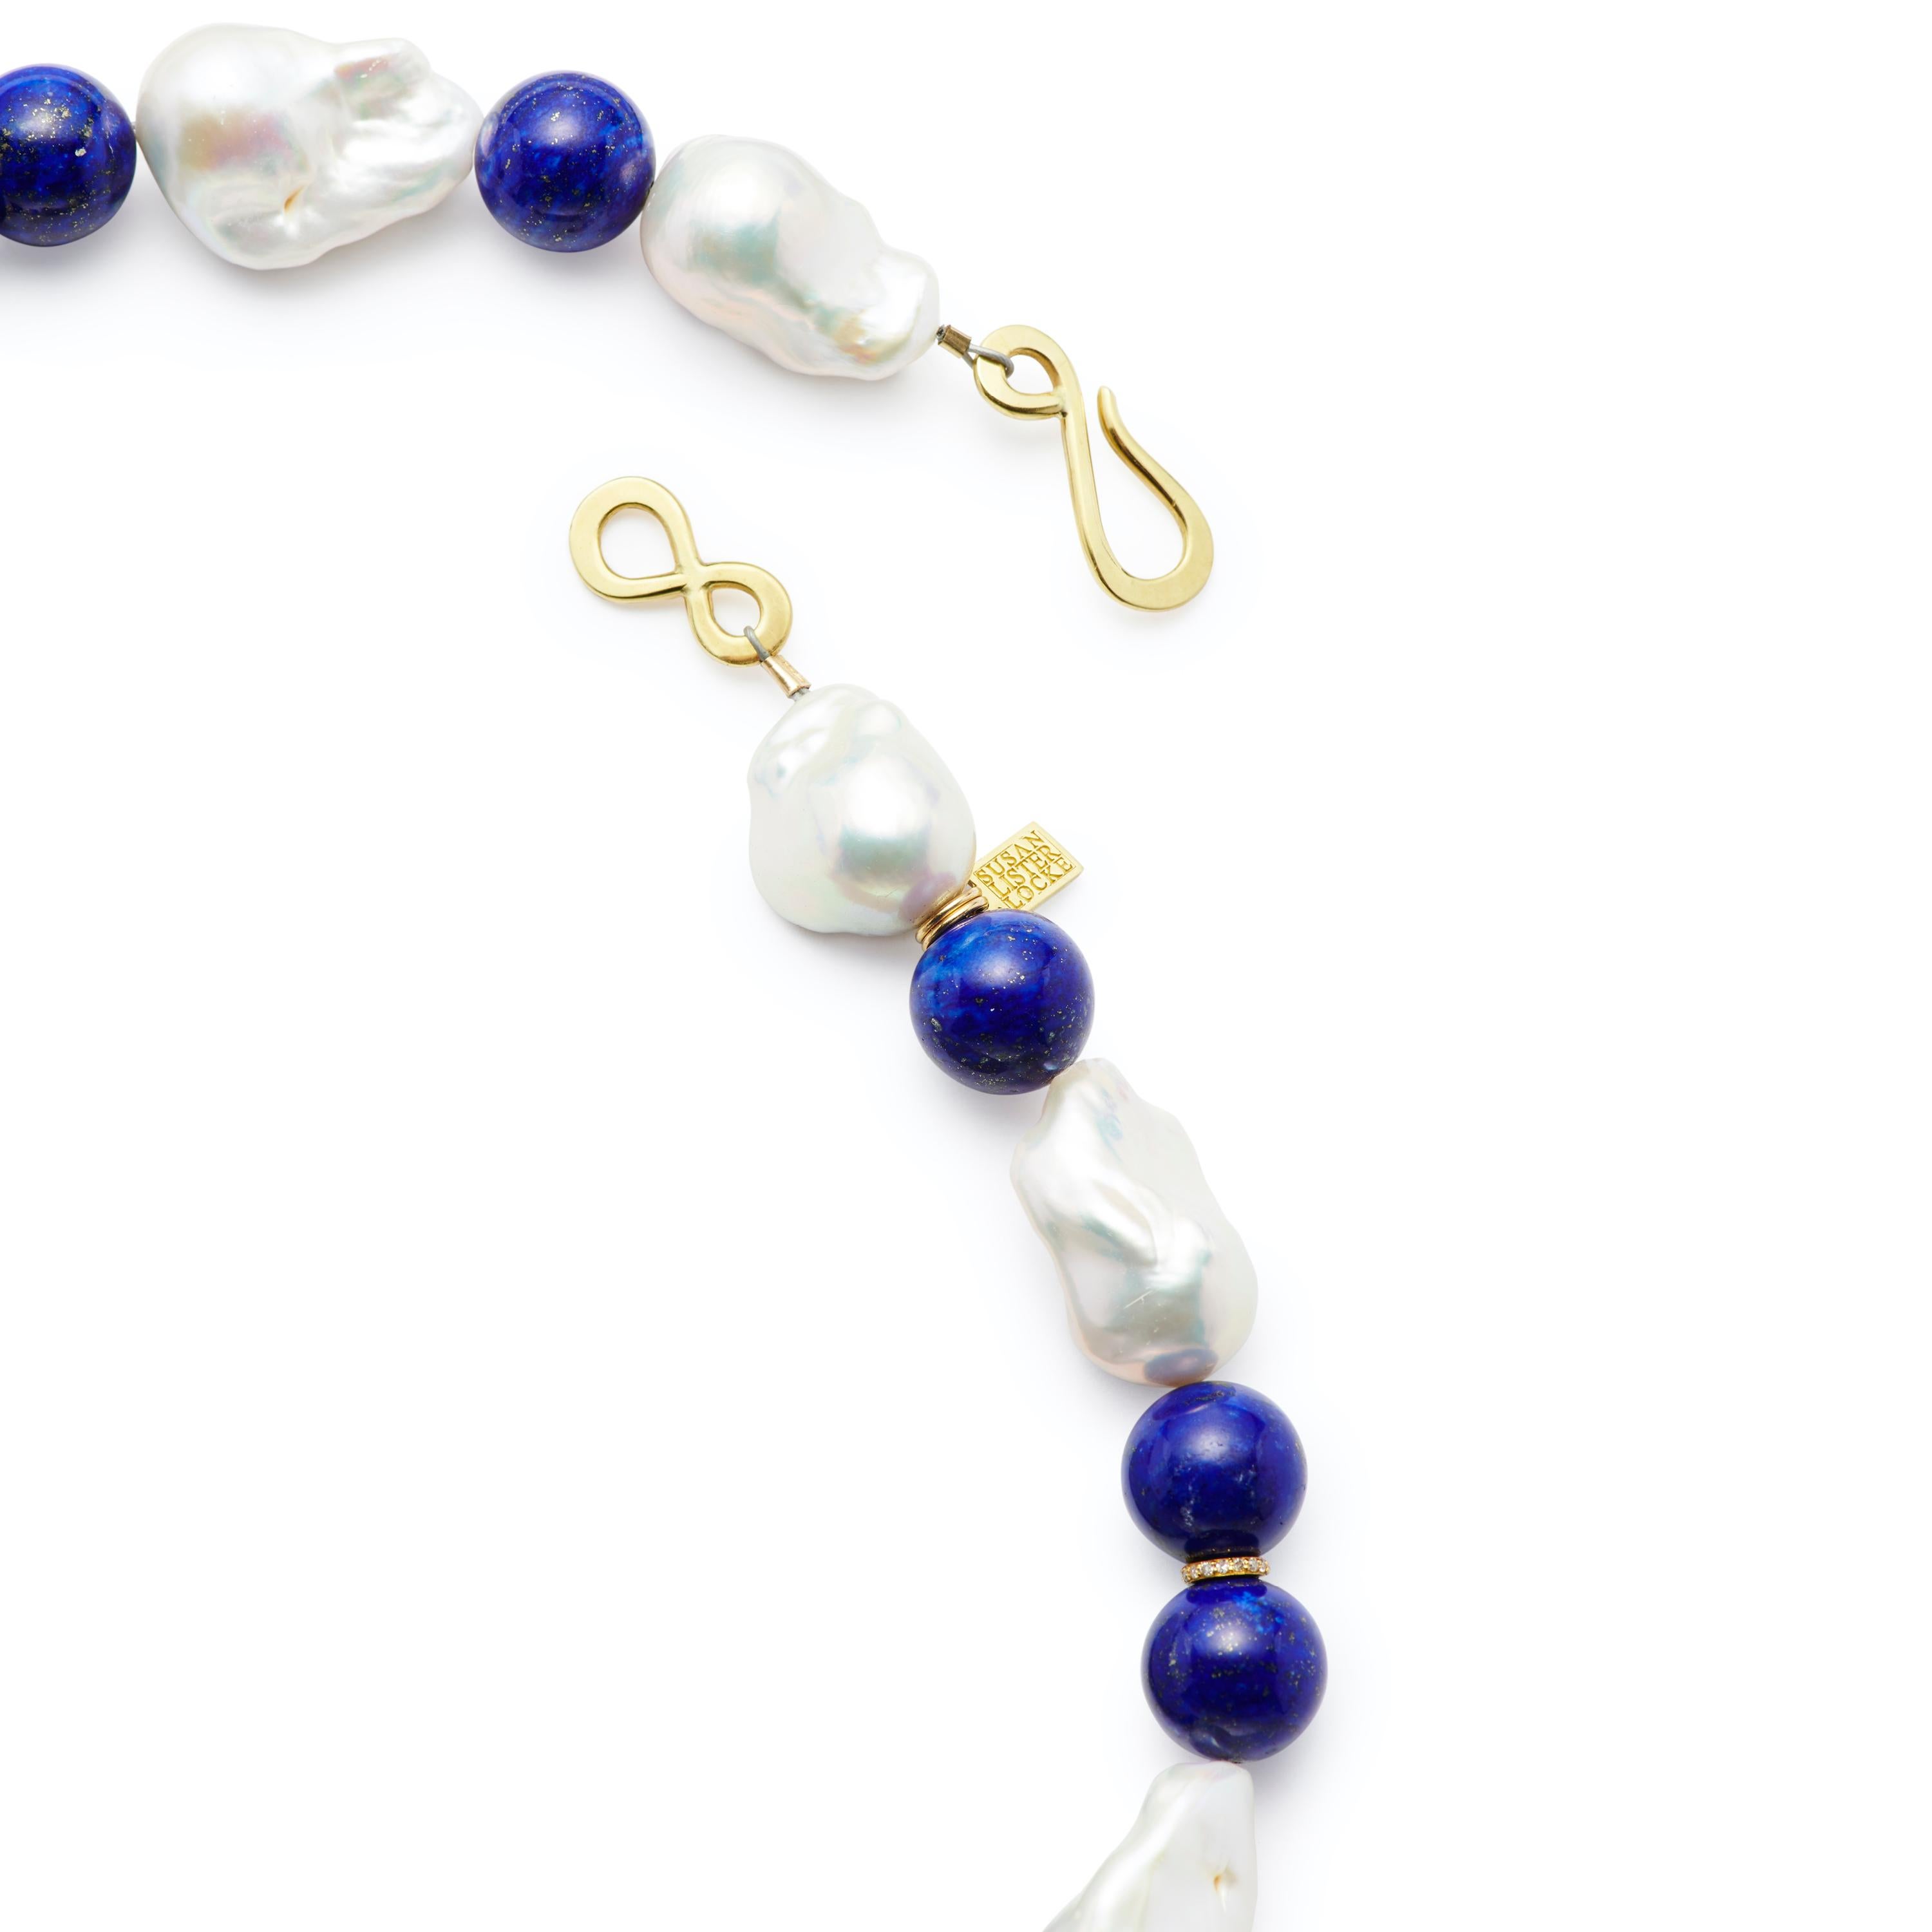 This stunning 19” strand of Baroque Pearls with 14mm Lapis Lazuli beads is accented with 18 Karat Gold and Diamond rondelles. Finished with an 18 Karat Gold Hook clasp.